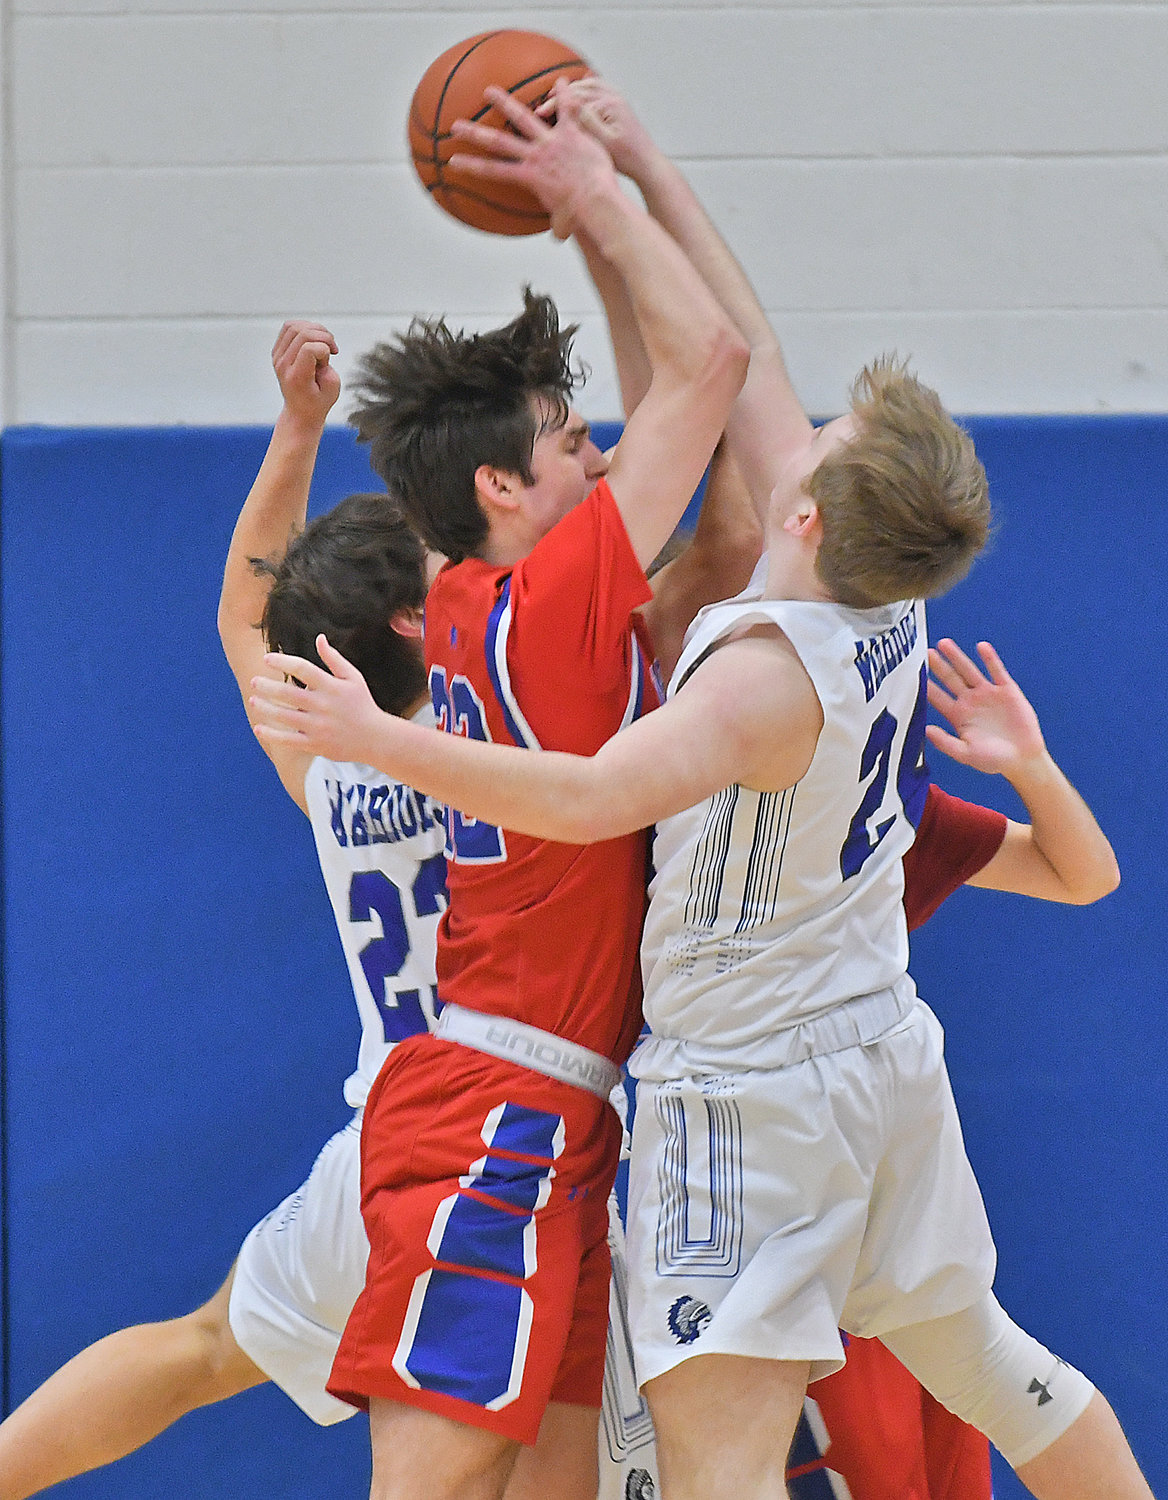 New Hartford's Colton Suriano gets tied up by Whitesboro's Ty Montrose, left, and Jason Roberts in the first half Monday at Whitesboro High School.